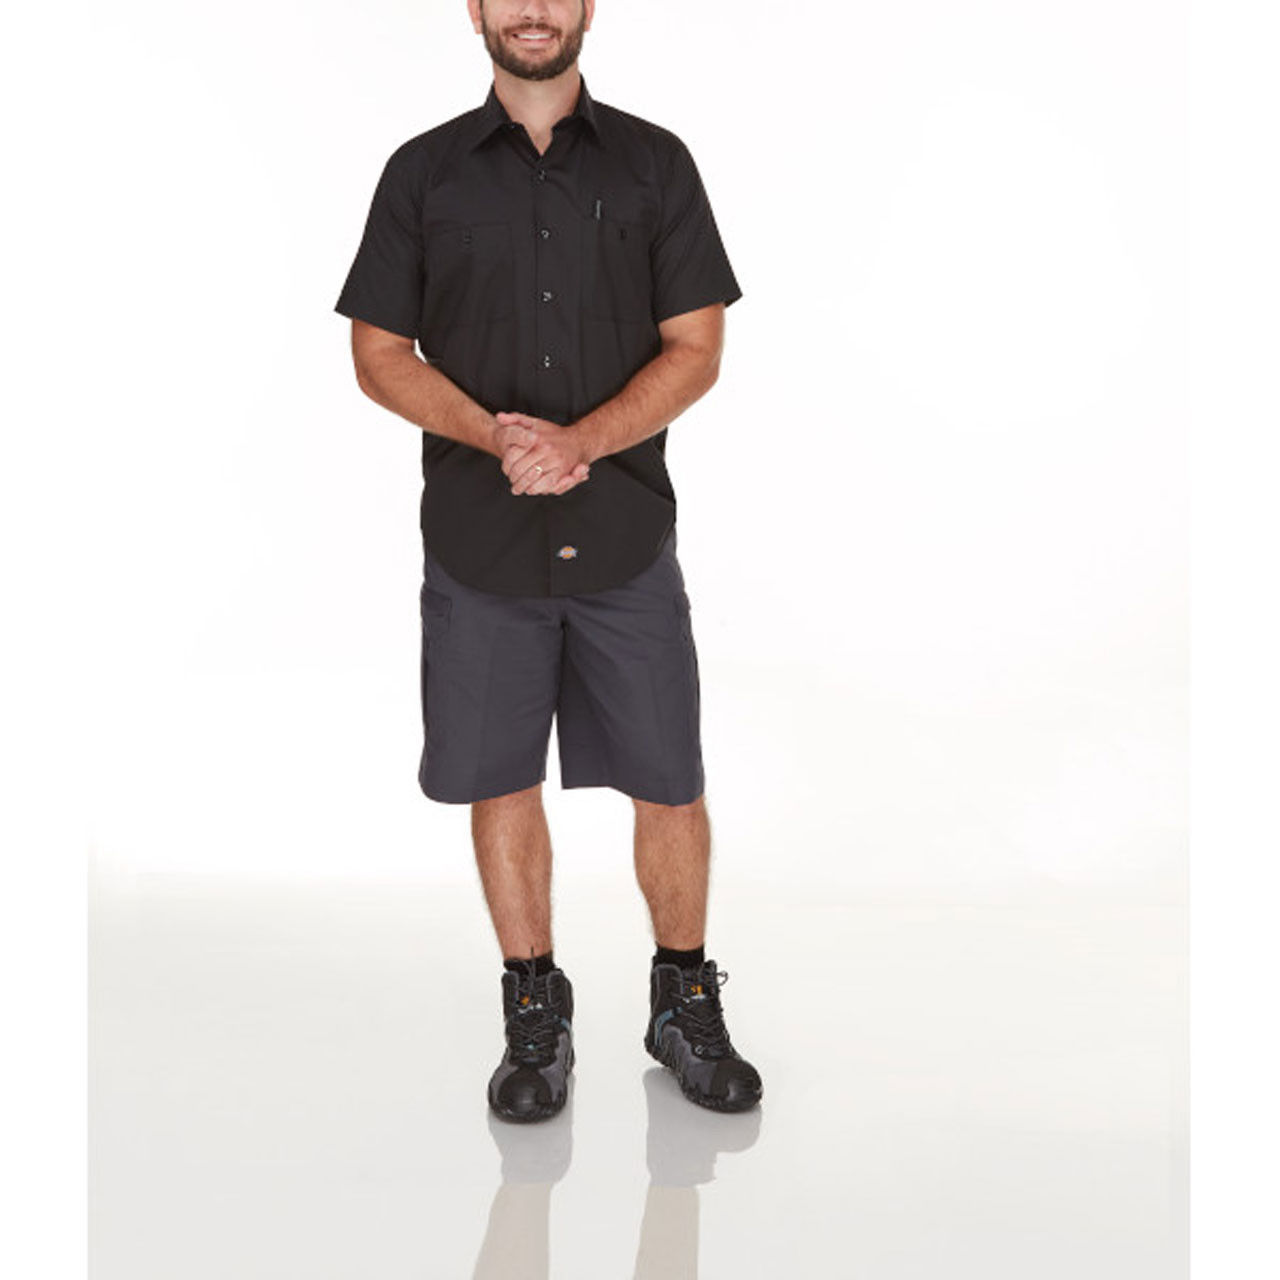 What is the final touch of these Dickies LS51 cooling work shirts?